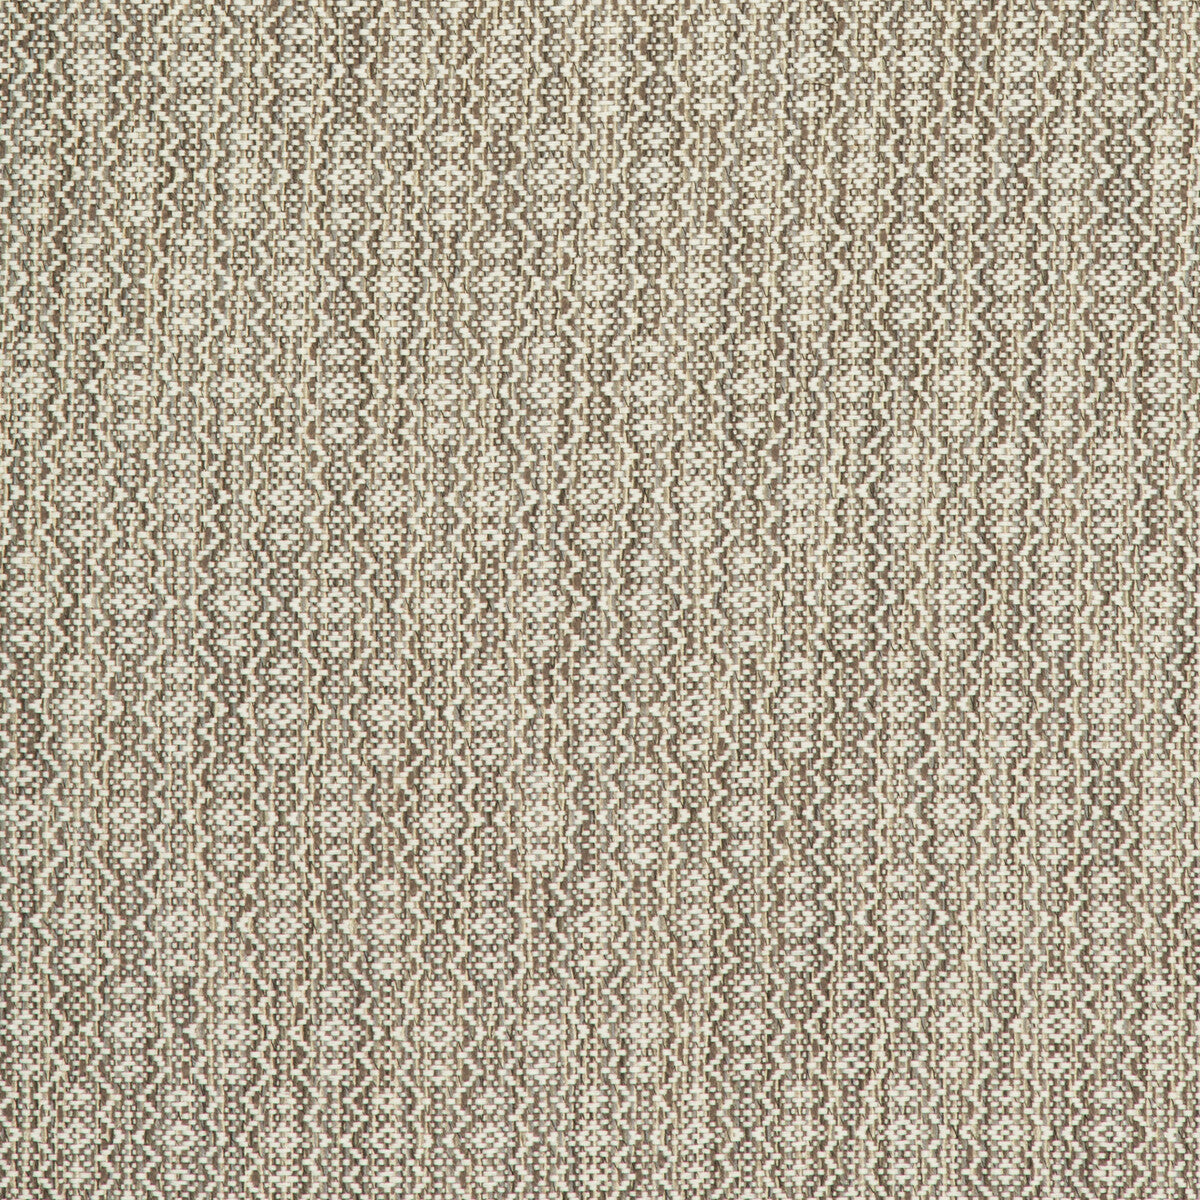 Kravet Smart fabric in 34625-611 color - pattern 34625.611.0 - by Kravet Smart in the Performance Crypton Home collection